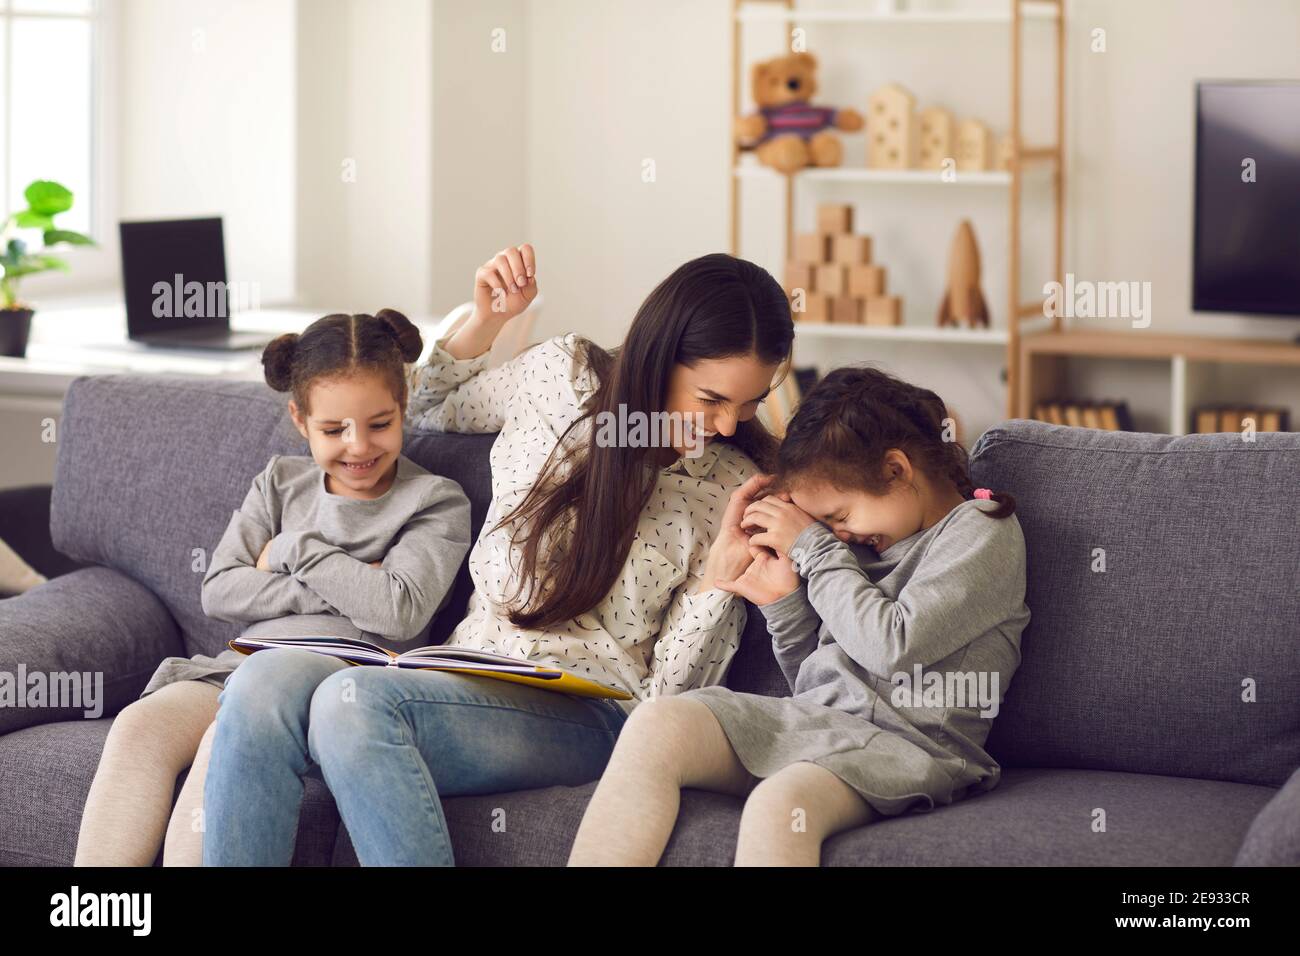 Spending time at home with children concept Stock Photo